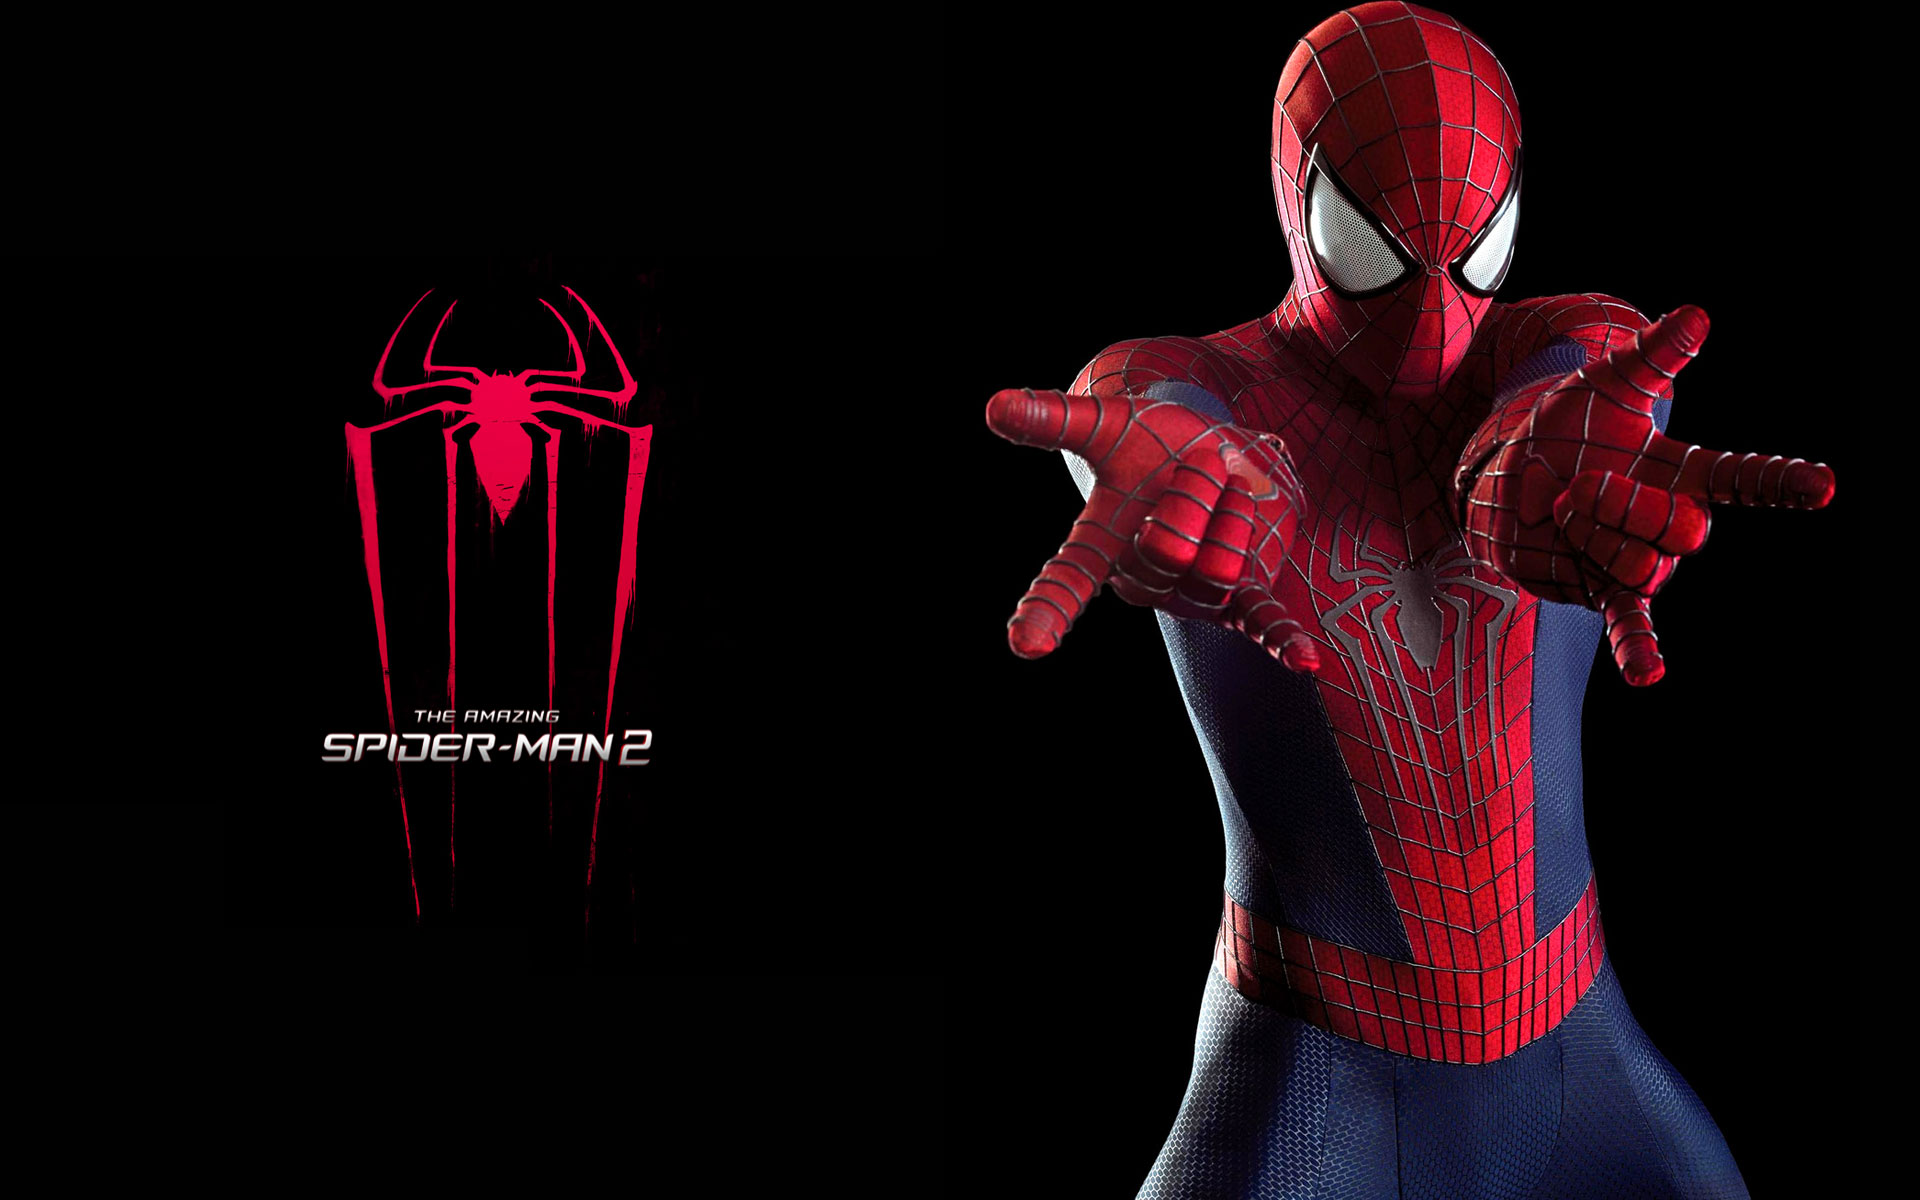 The Amazing Spider Man Wallpaper HD Cover Photos